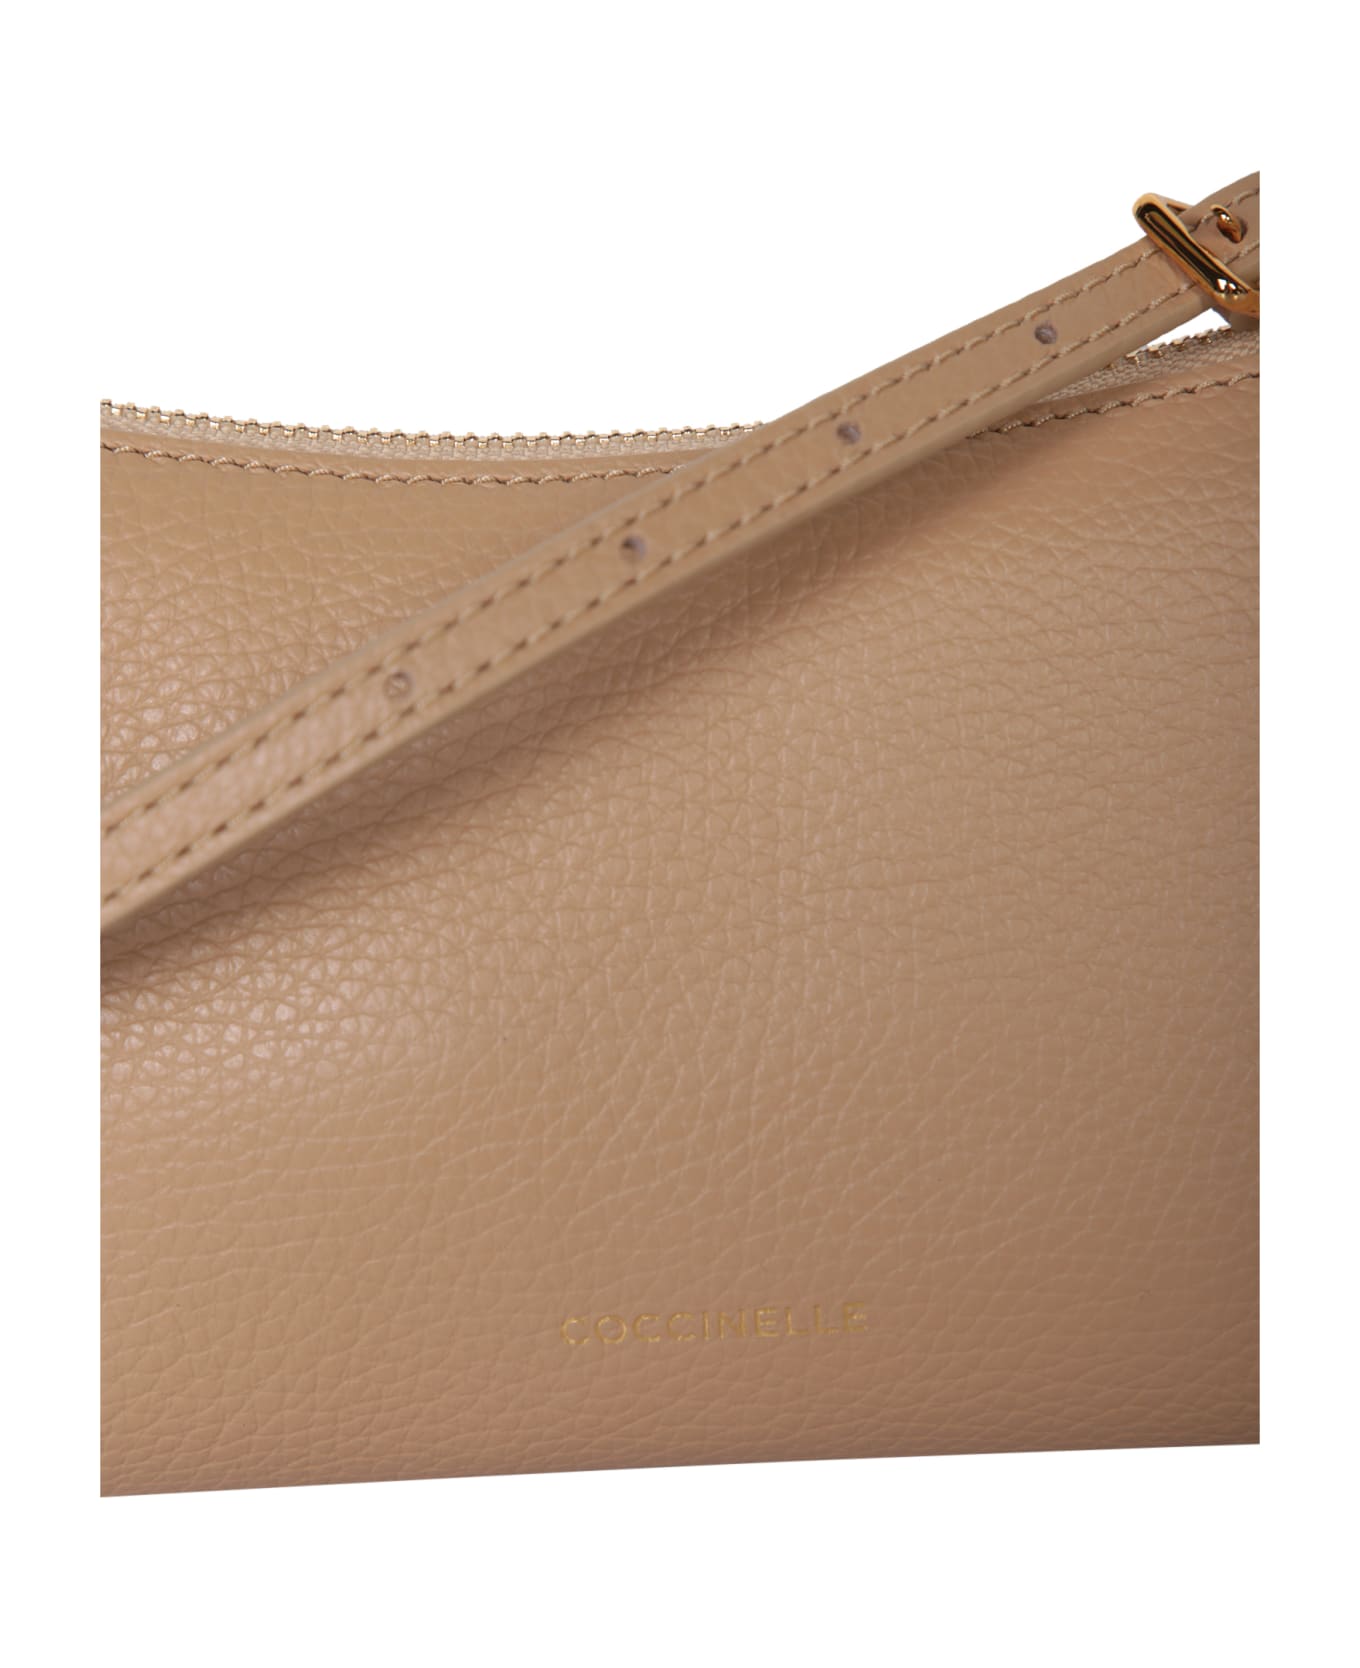 Coccinelle Aura Beige Leather Bag - Beige ショルダーバッグ